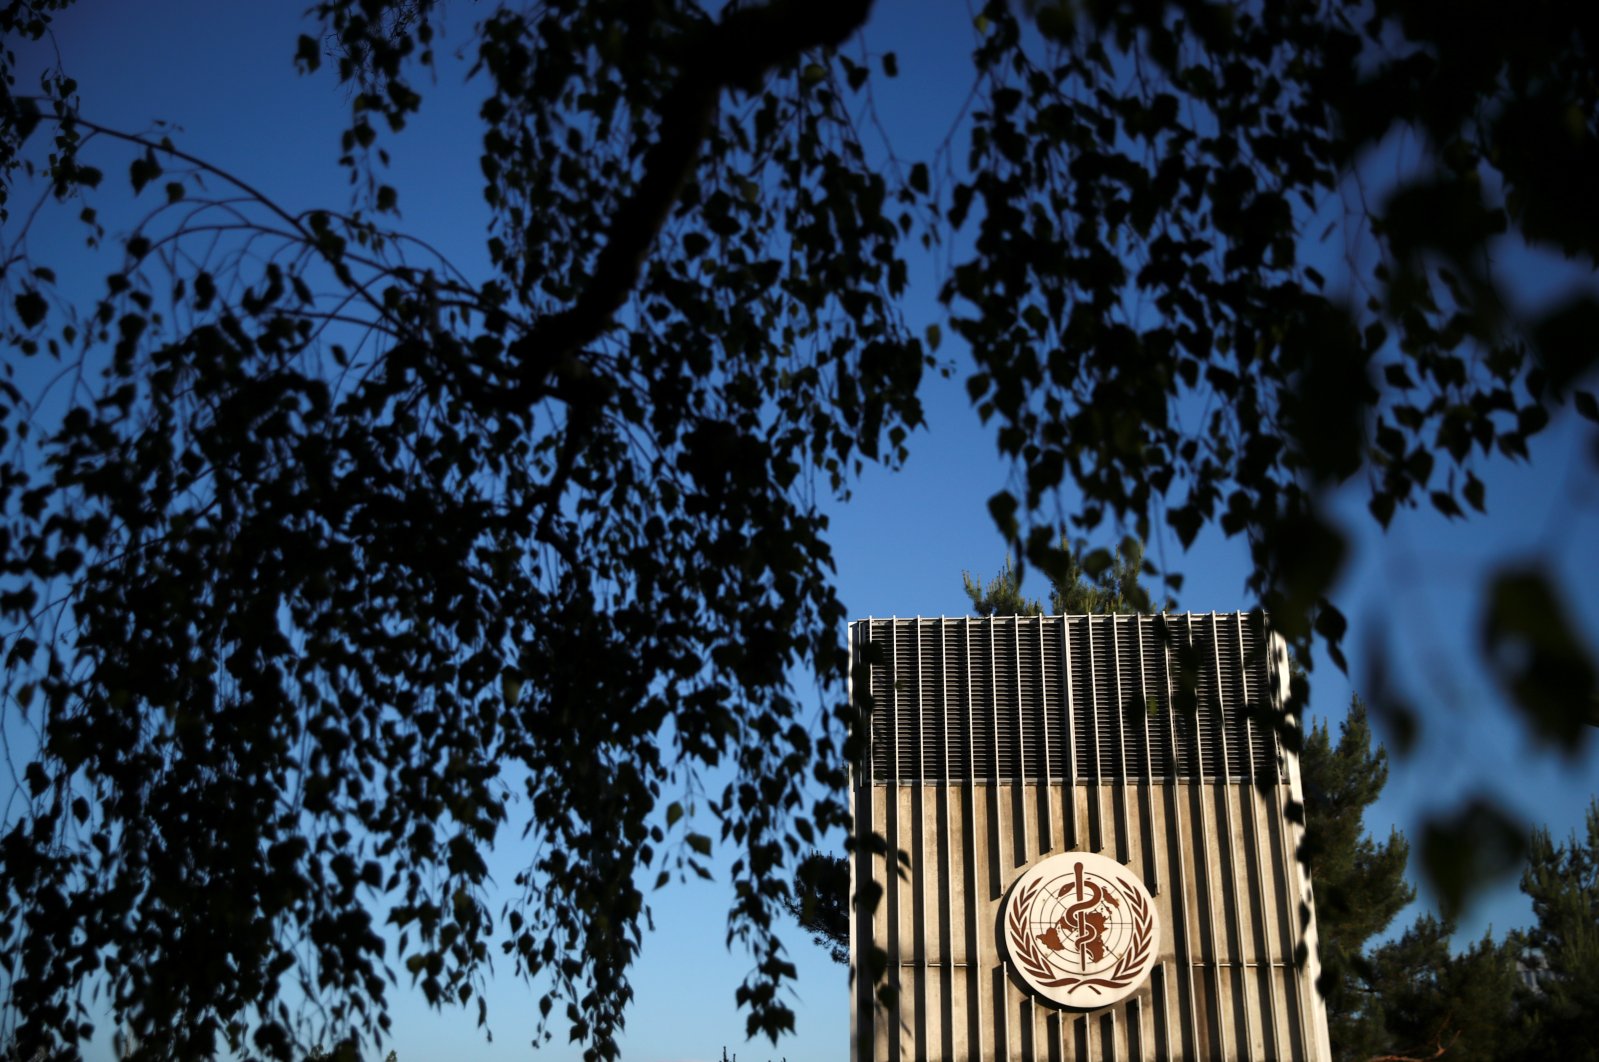 The headquarters of the World Health Organization (WHO) are pictured during the World Health Assembly (WHA) following the outbreak of the coronavirus disease (COVID-19) in Geneva, Switzerland, May 18, 2020. (Reuters Photo)